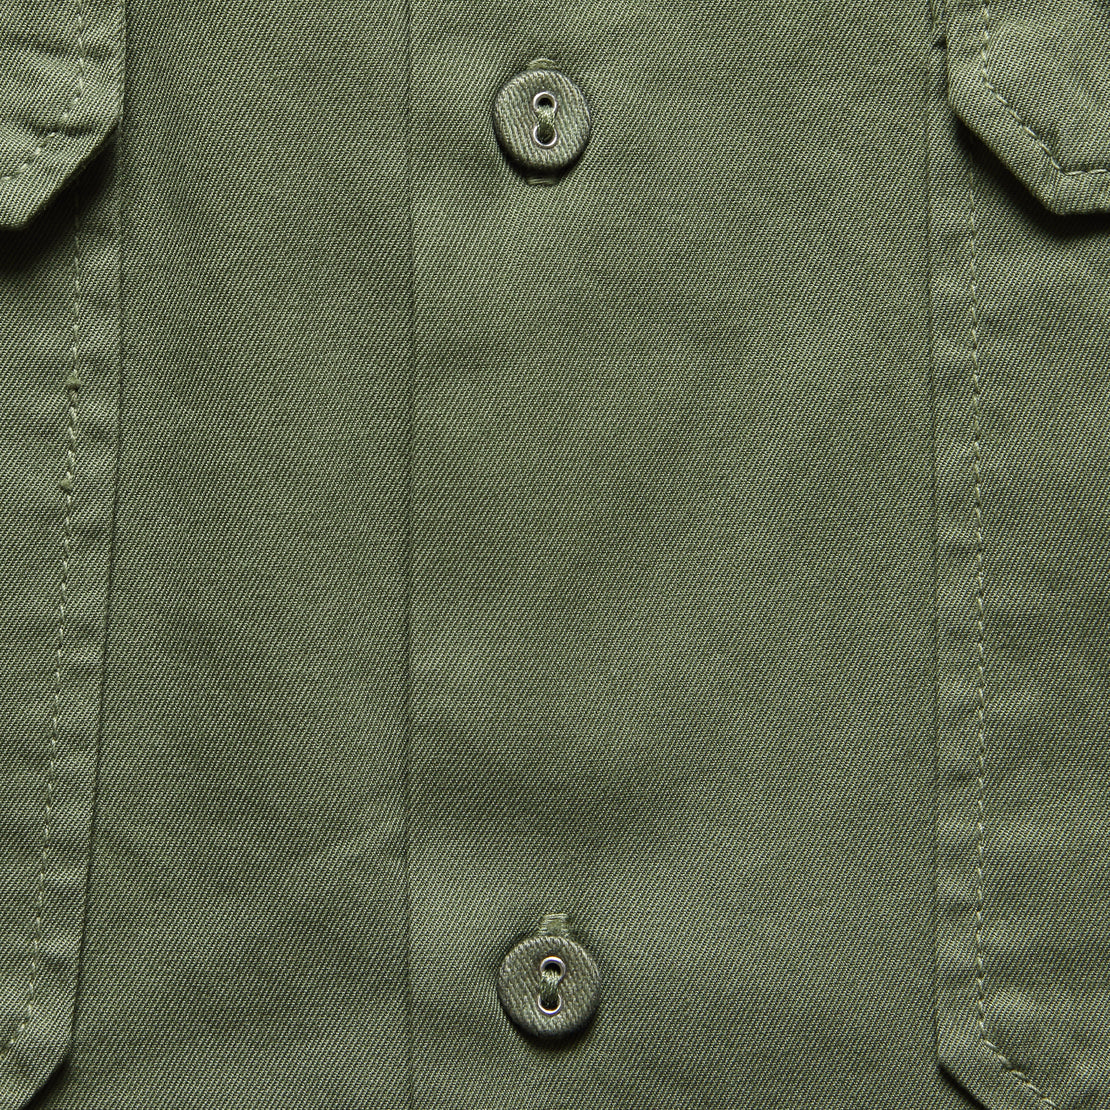 Twill Camp Shirt - Olive Drab - Save Khaki - STAG Provisions - Tops - S/S Woven - Solid